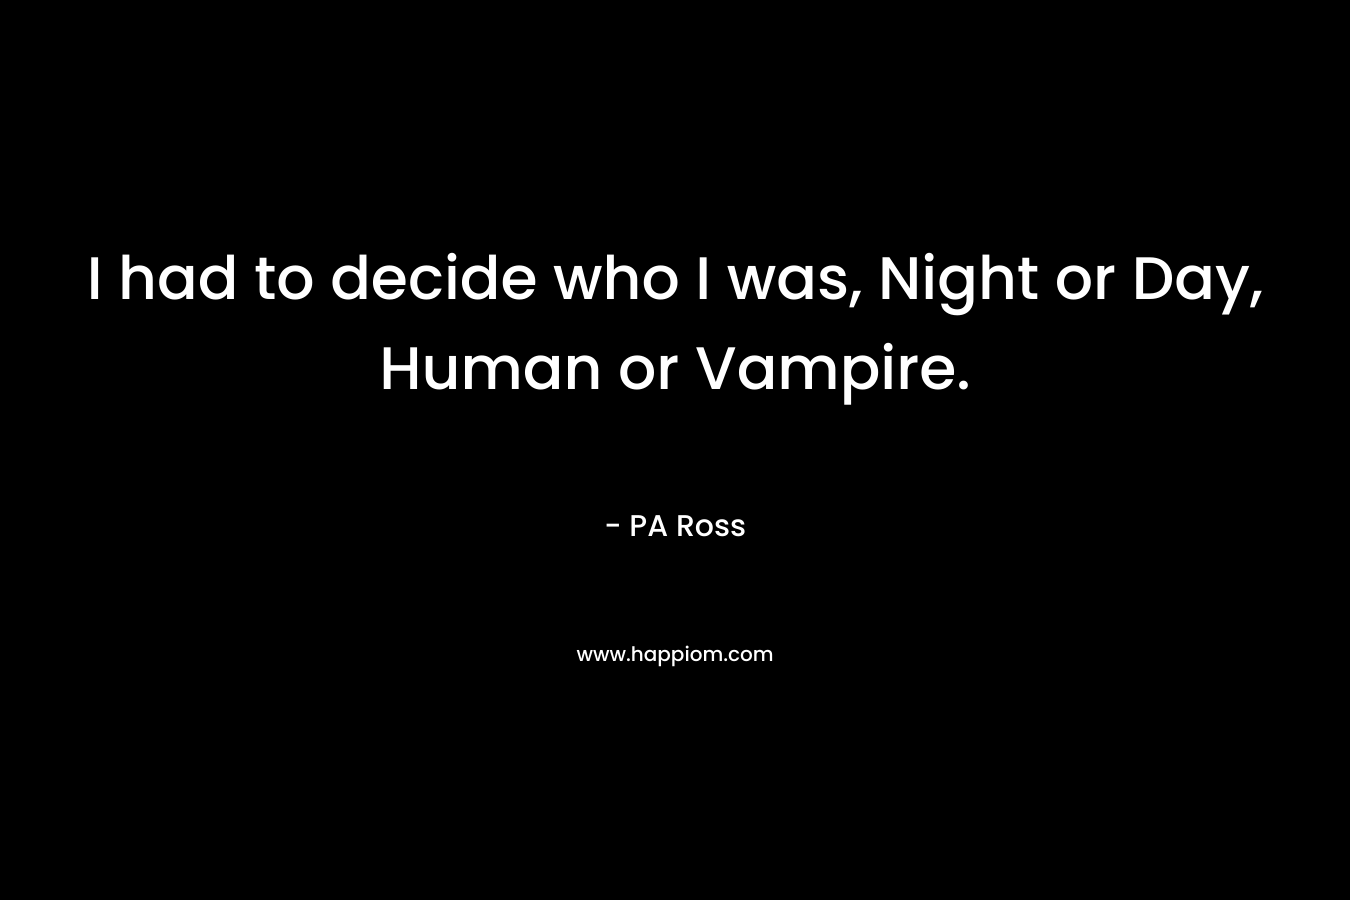 I had to decide who I was, Night or Day, Human or Vampire.